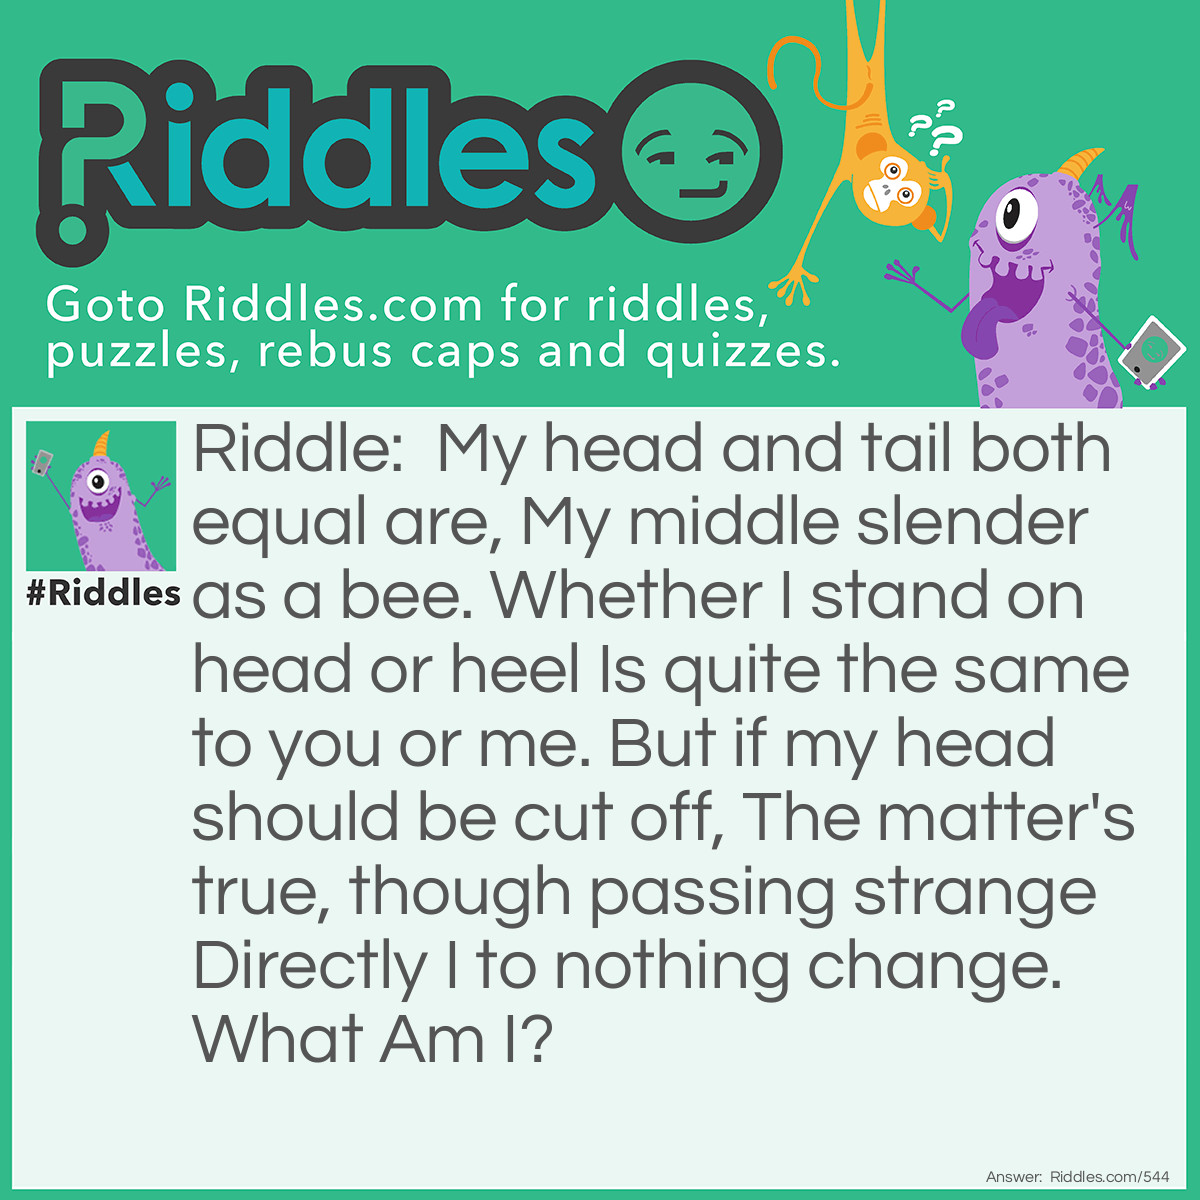 Riddle: My head and tail both equal are, My middle slender as a bee. Whether I stand on head or heel Is quite the same to you or me. But if my head should be cut off, The matter's true, though passing strange Directly I to nothing change.
What Am I? Answer: The figure eight.